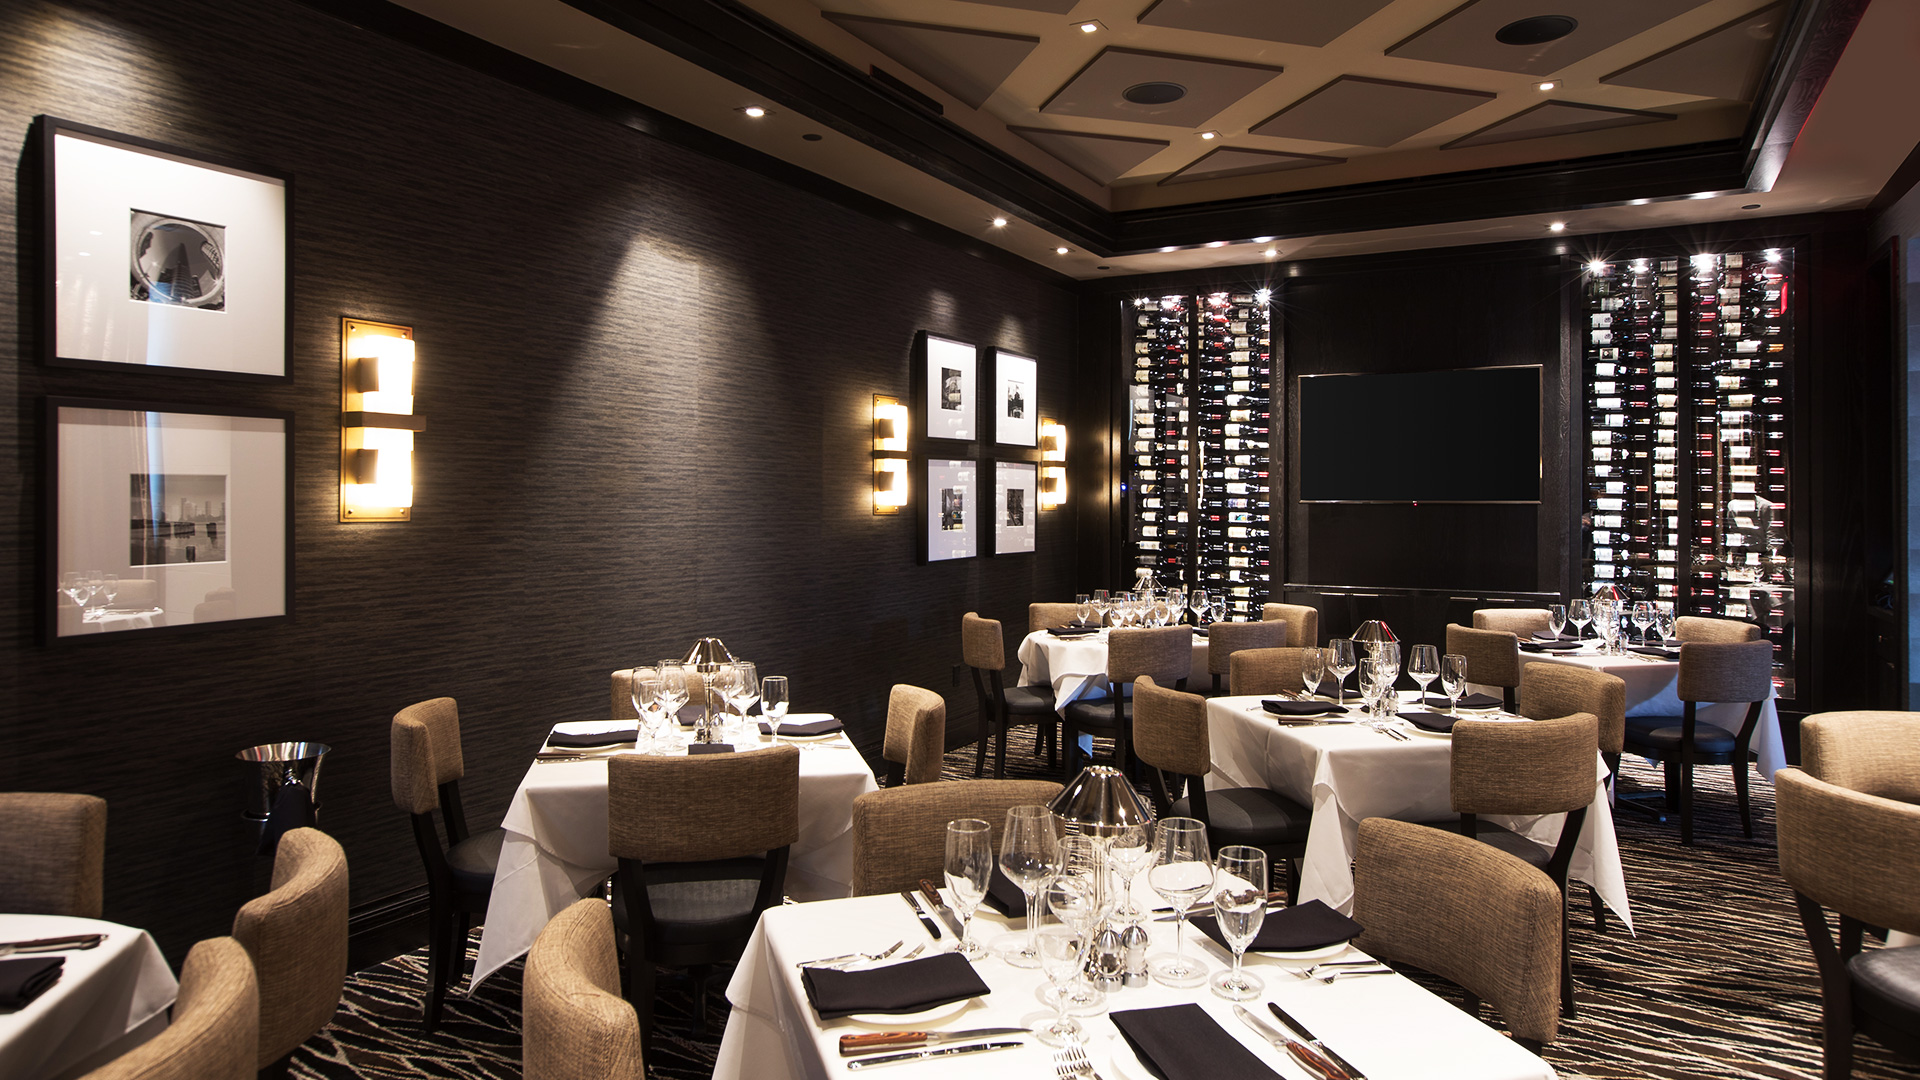 Mastro’s Steakhouse | O'Donnell/Snider Construction